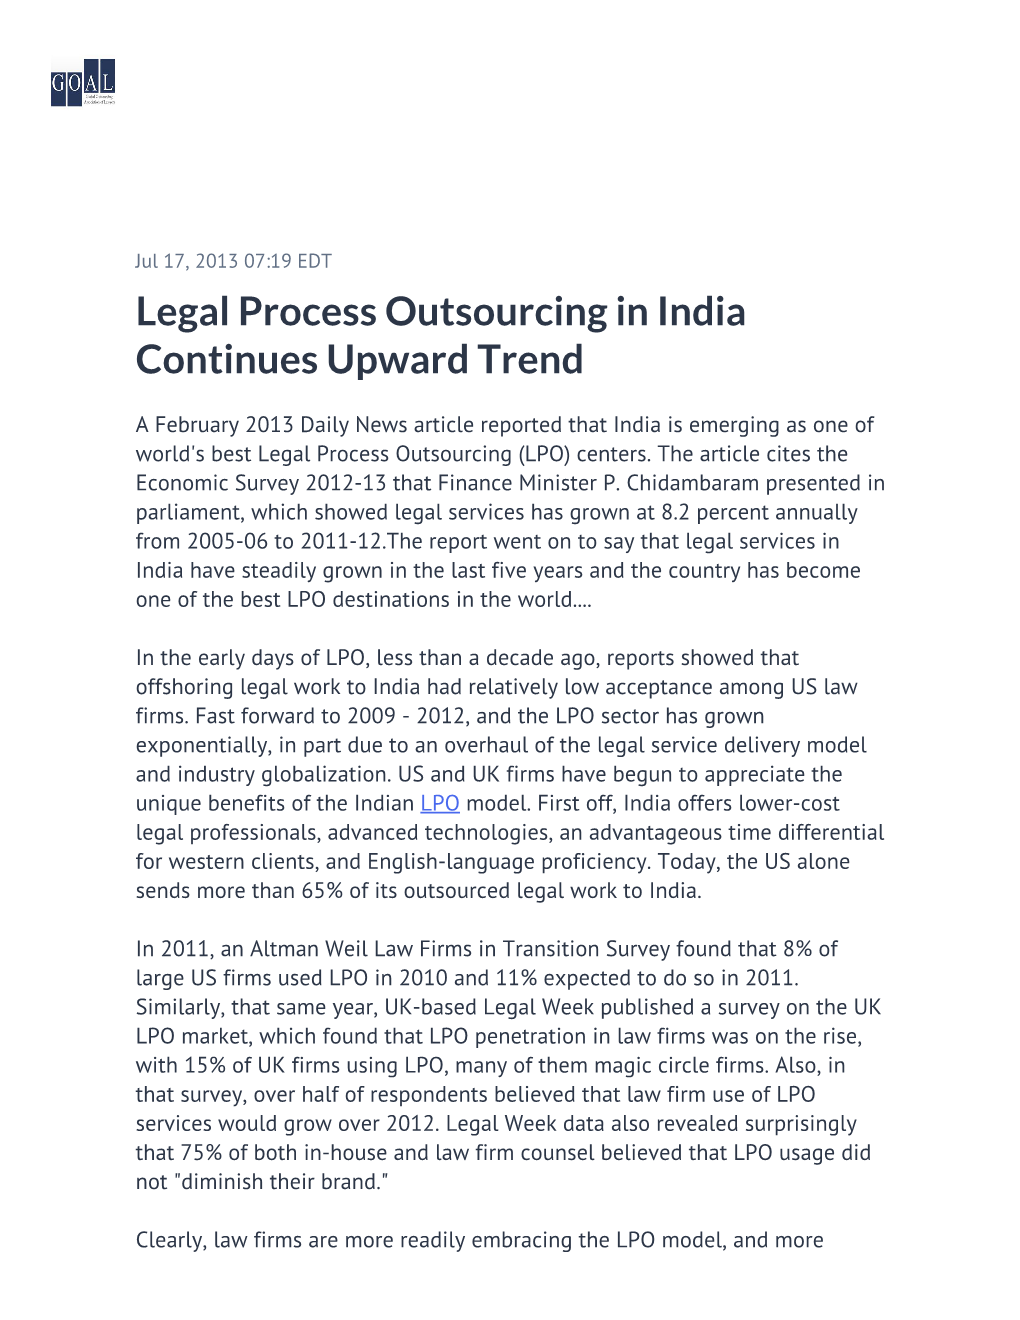 Legal Process Outsourcing in India Continues Upward Trend